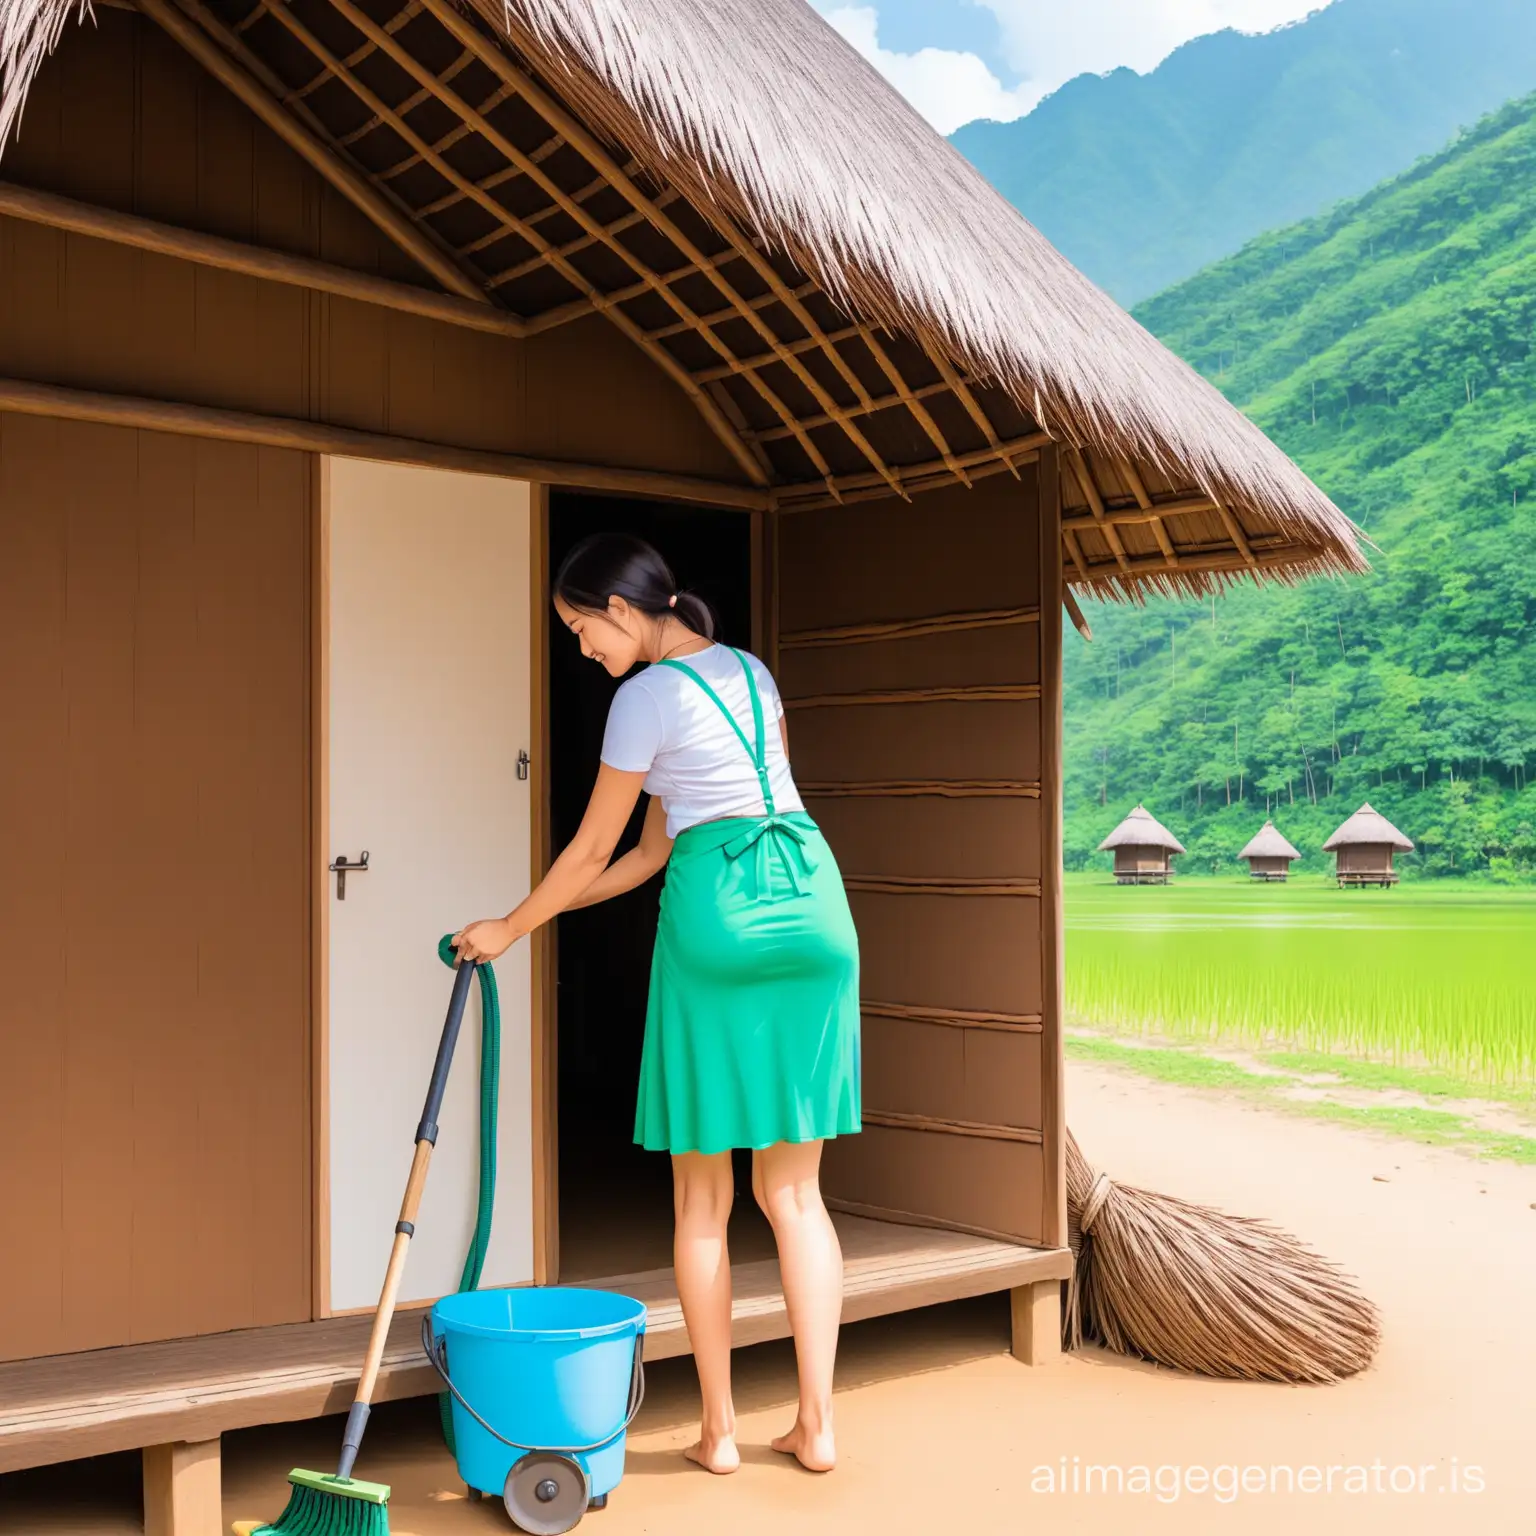 Woman-Cleaning-Rustic-Hut-with-Traditional-Tools